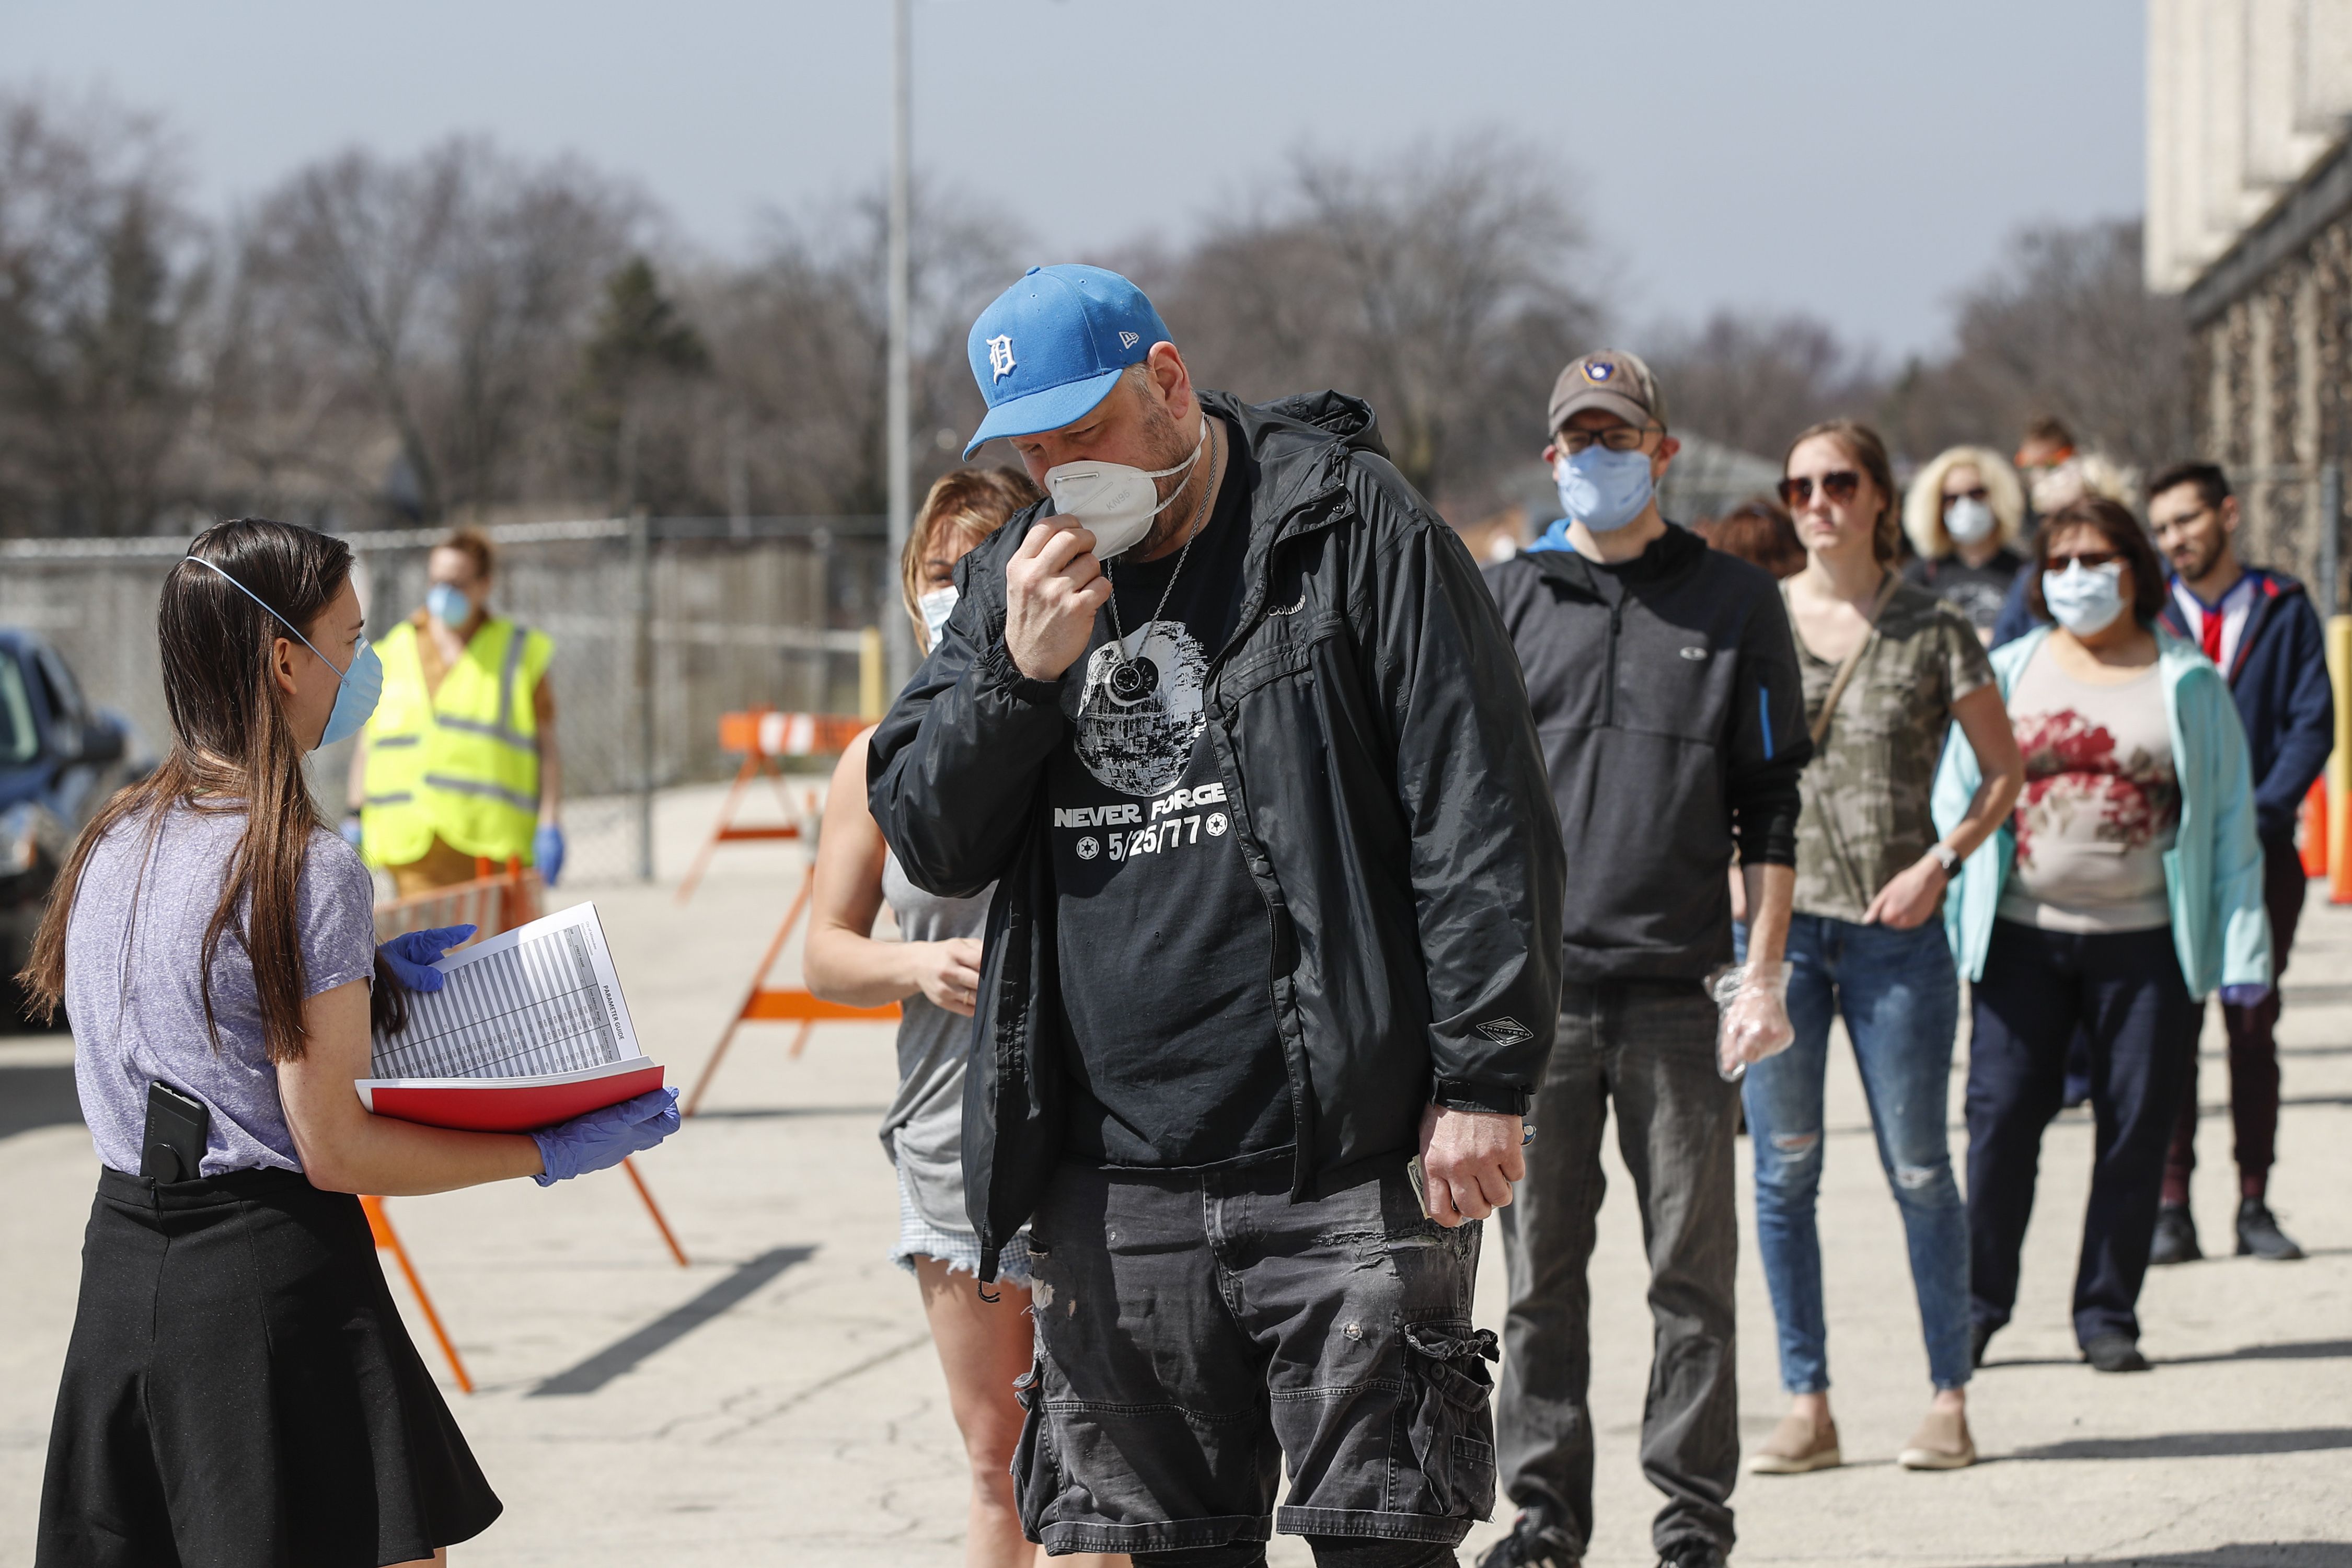 In this image, a line of people wearing face masks stand outside